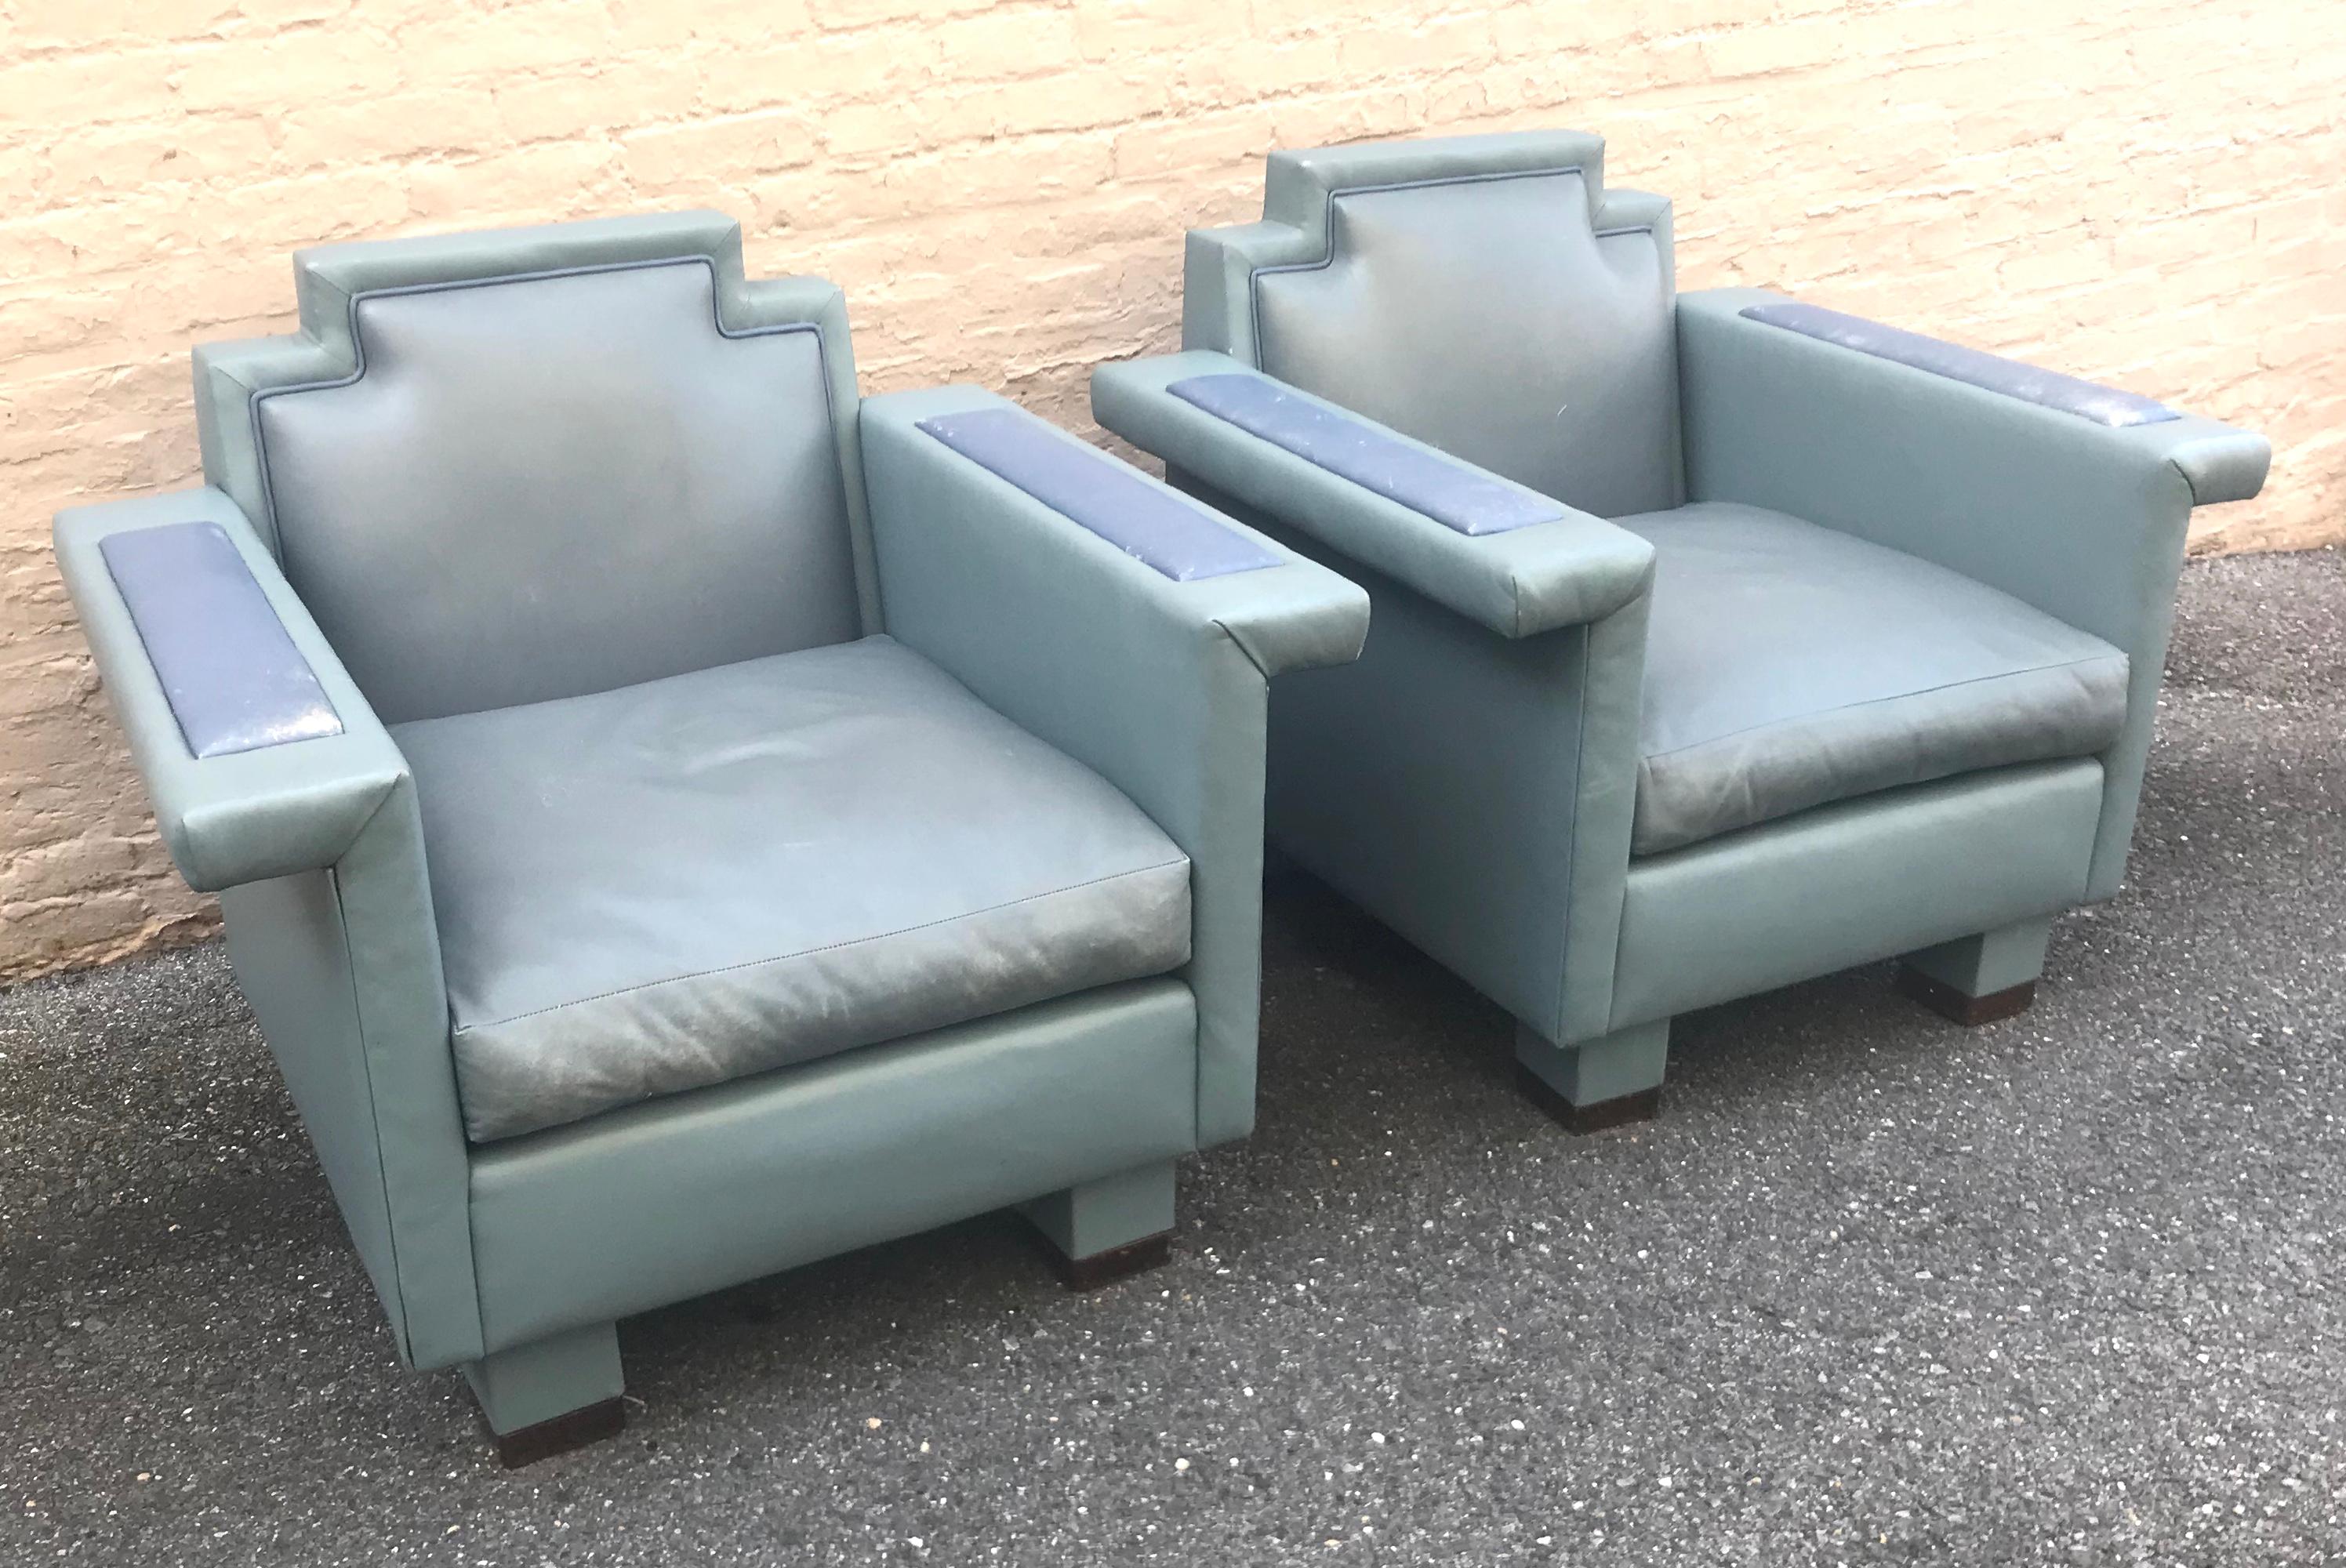 Exceptional Pair of 1980s Ronn Jaffe Postmodern Leather Lounge Chairs In Excellent Condition For Sale In Washington, DC